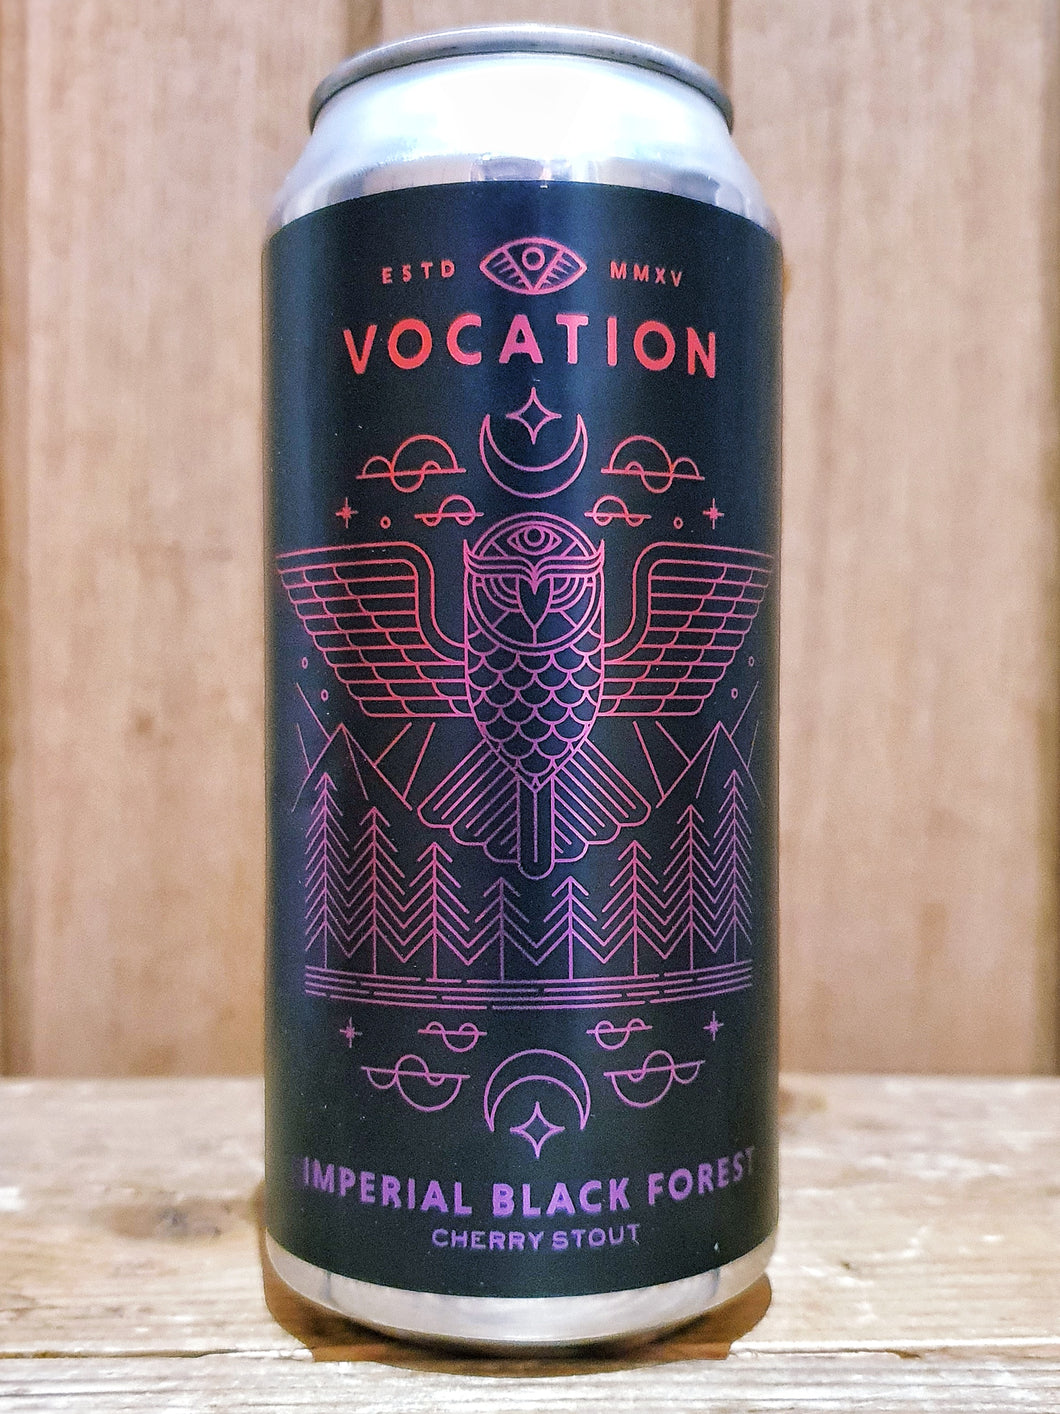 Vocation Brewery - Imperial Black Forest Cherry Stout